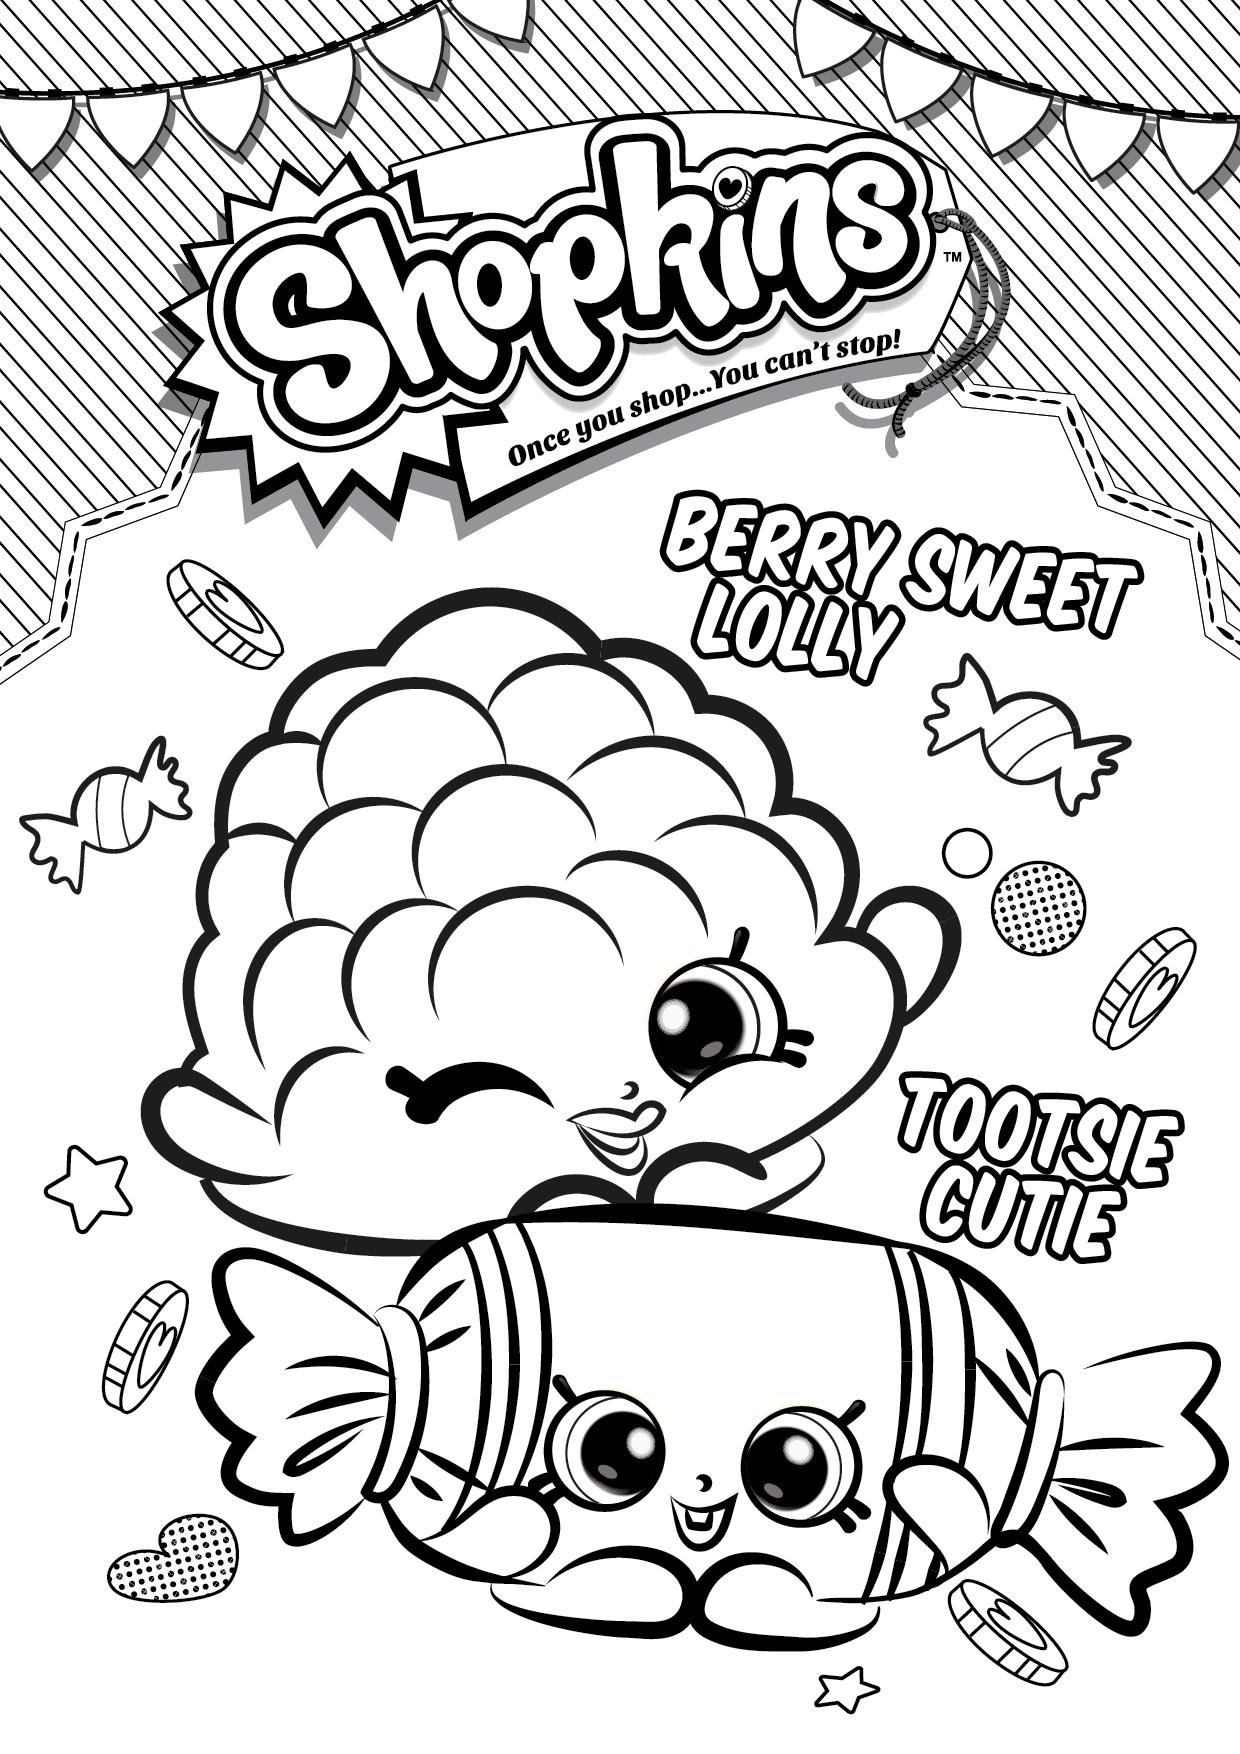 strawberry-kiss-shopkin-season-1-coloring-page-free-coloring-pages-online